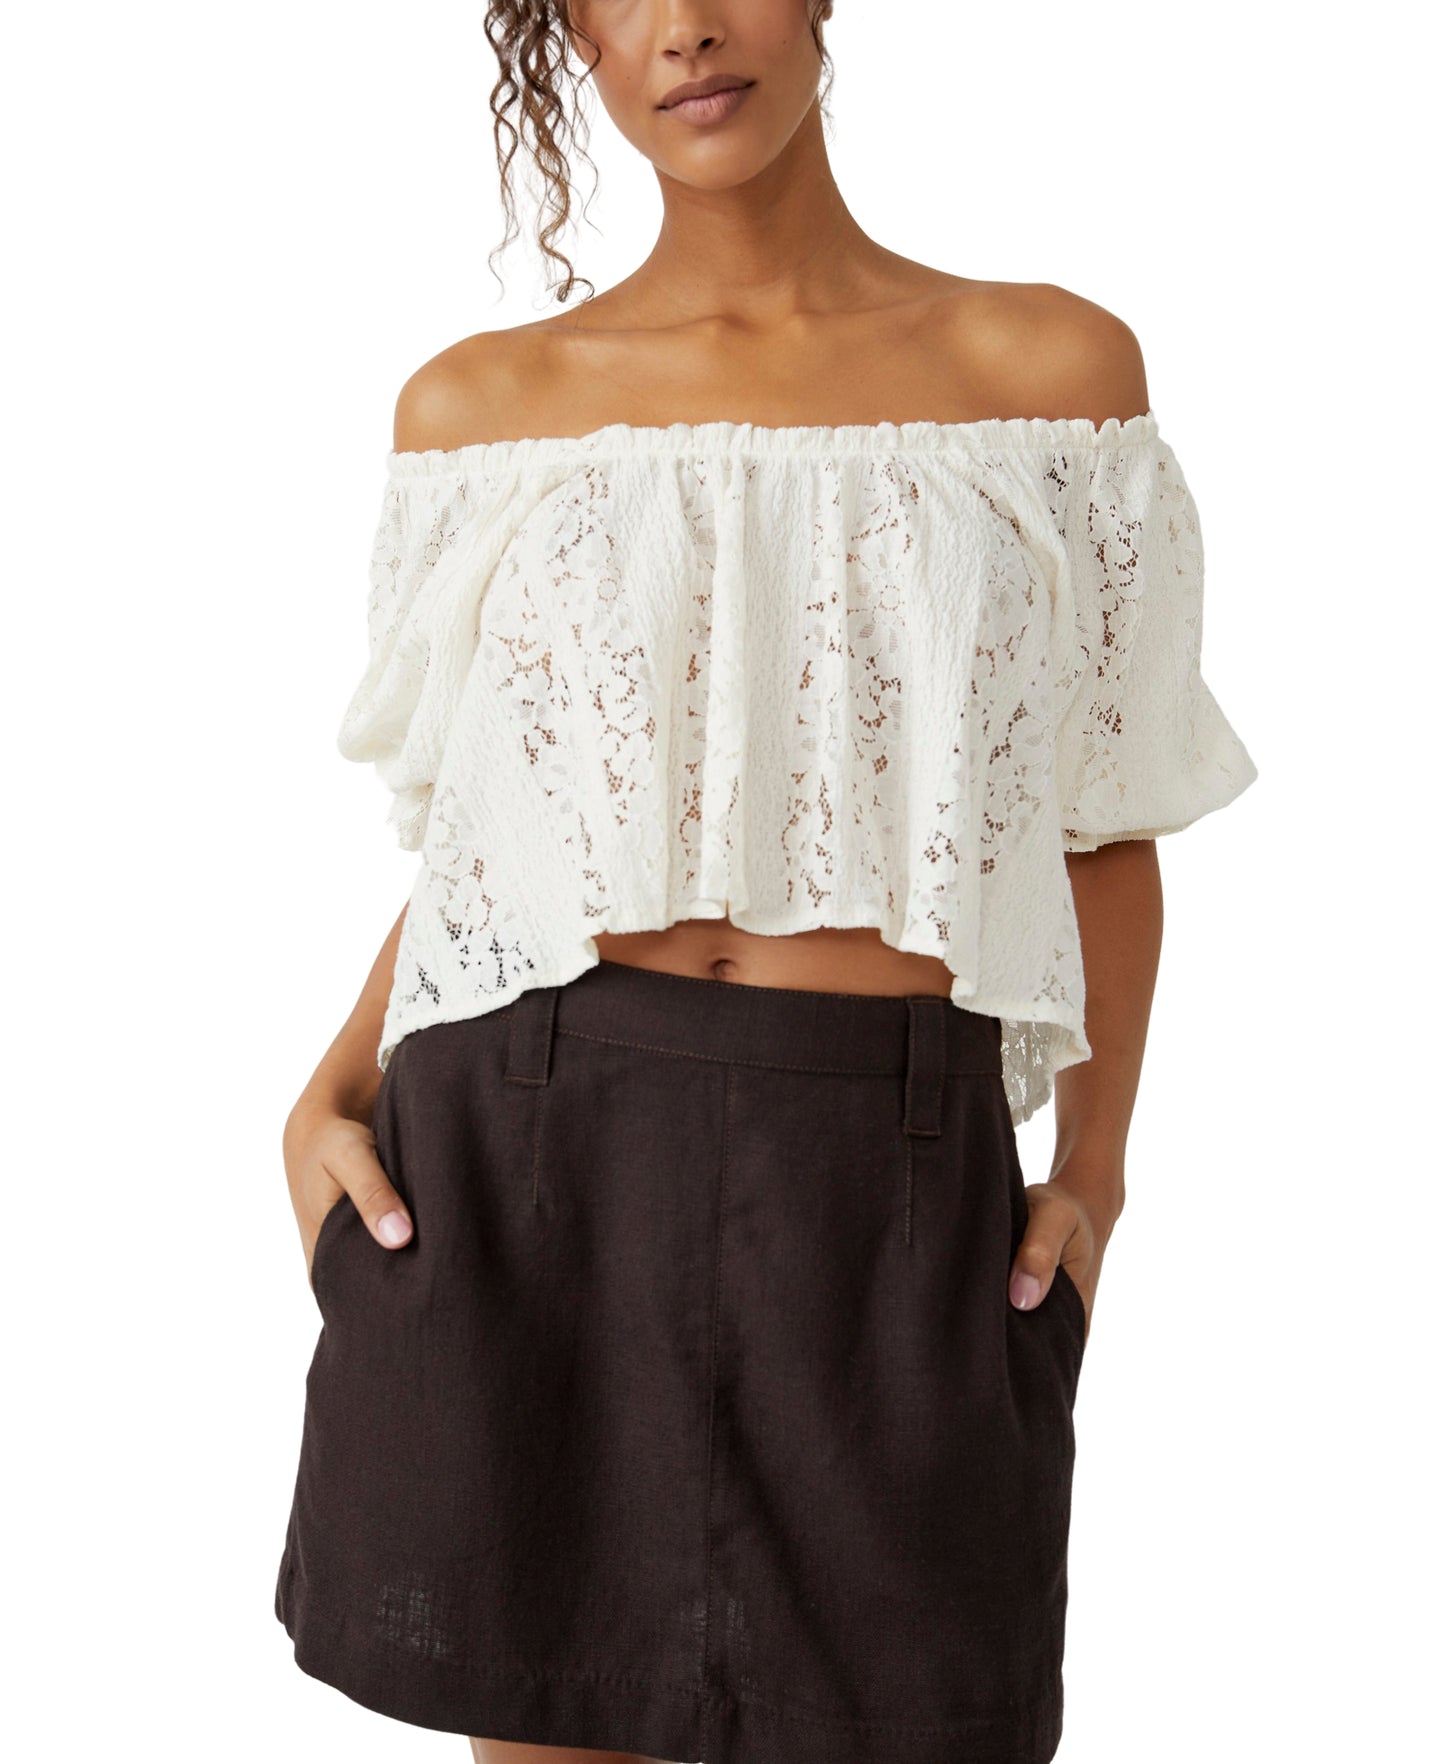 Free People Stacey Lace Top